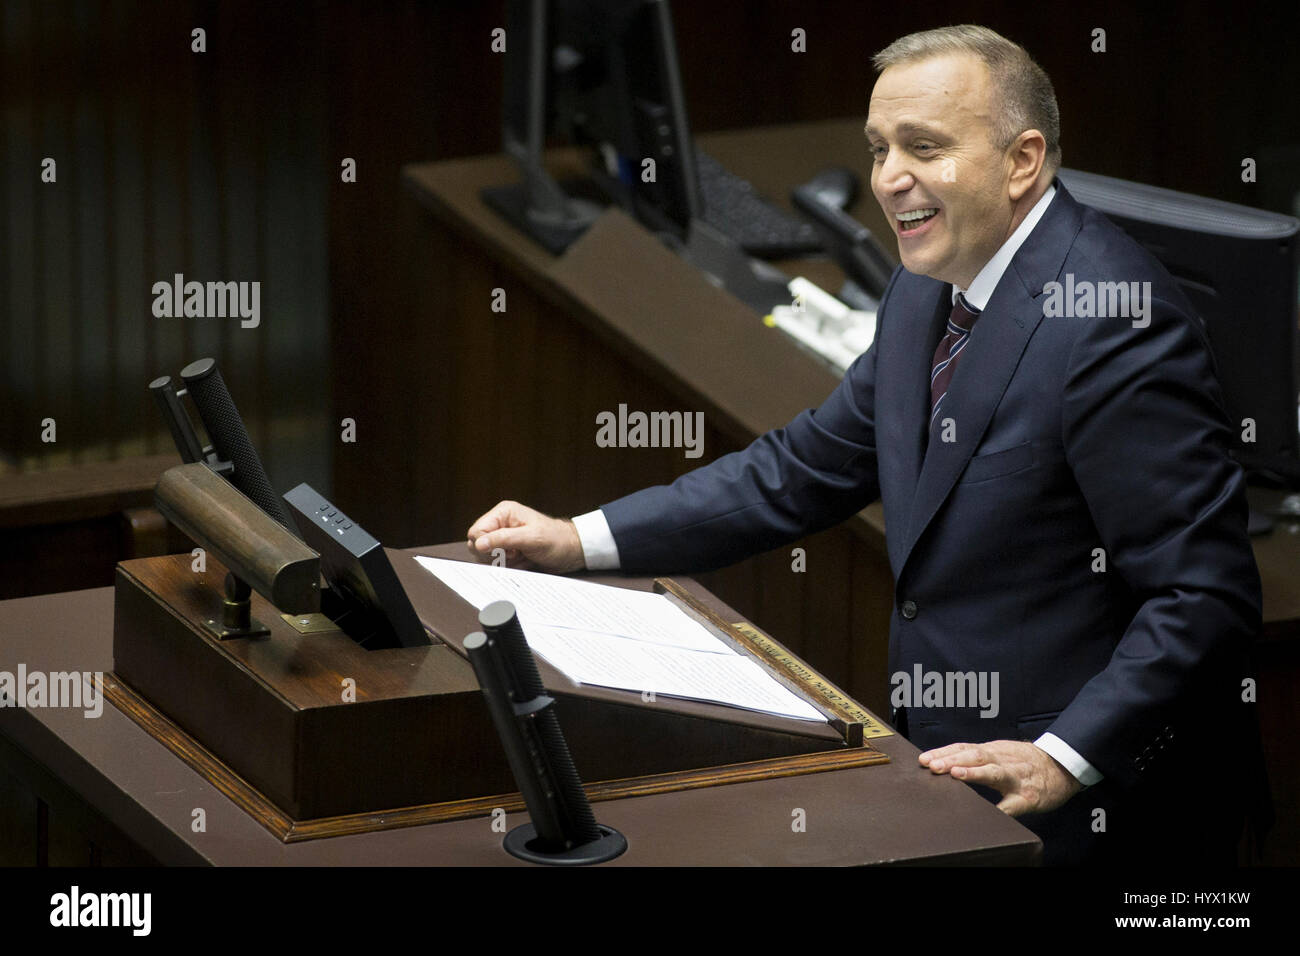 Warsaw, Poland. 07th Apr, 2017. Civic Platform leader Grzegorz Schetyna Members of Parliament vote againsts the constructive vote of no confidence for Beata Szydlo's government filed by the Civic Platform (PO) in Sejm on April 7, 2017 in Warsaw, Poland. Credit: East News sp. z o.o./Alamy Live News Stock Photo